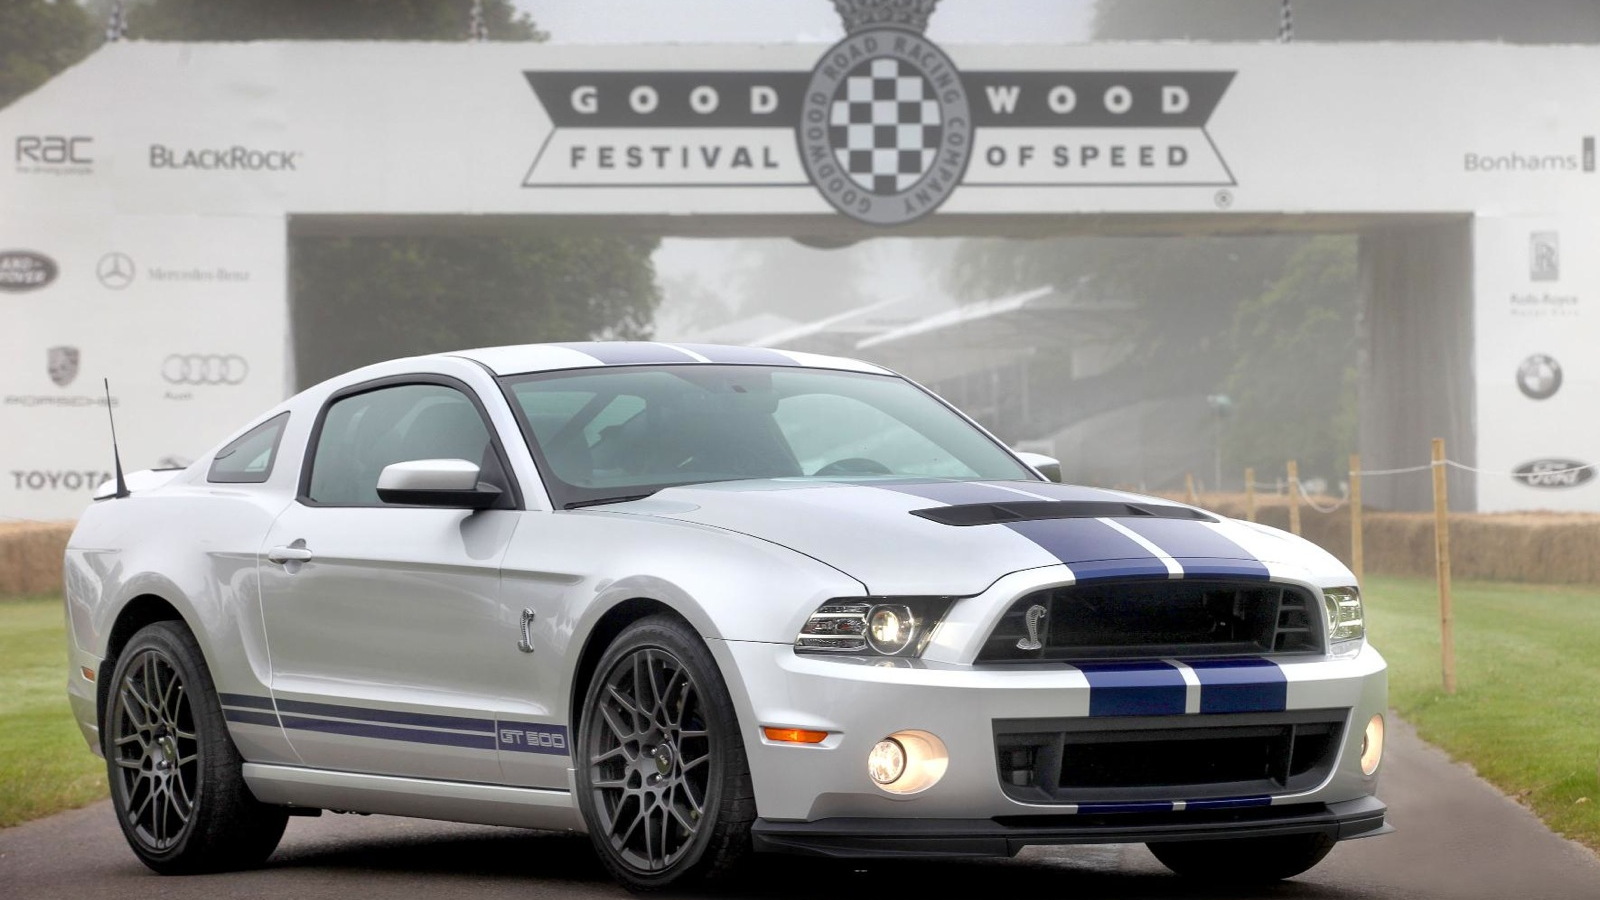 The 2013 Shelby GT500 at the Goodwood Festival of Speed